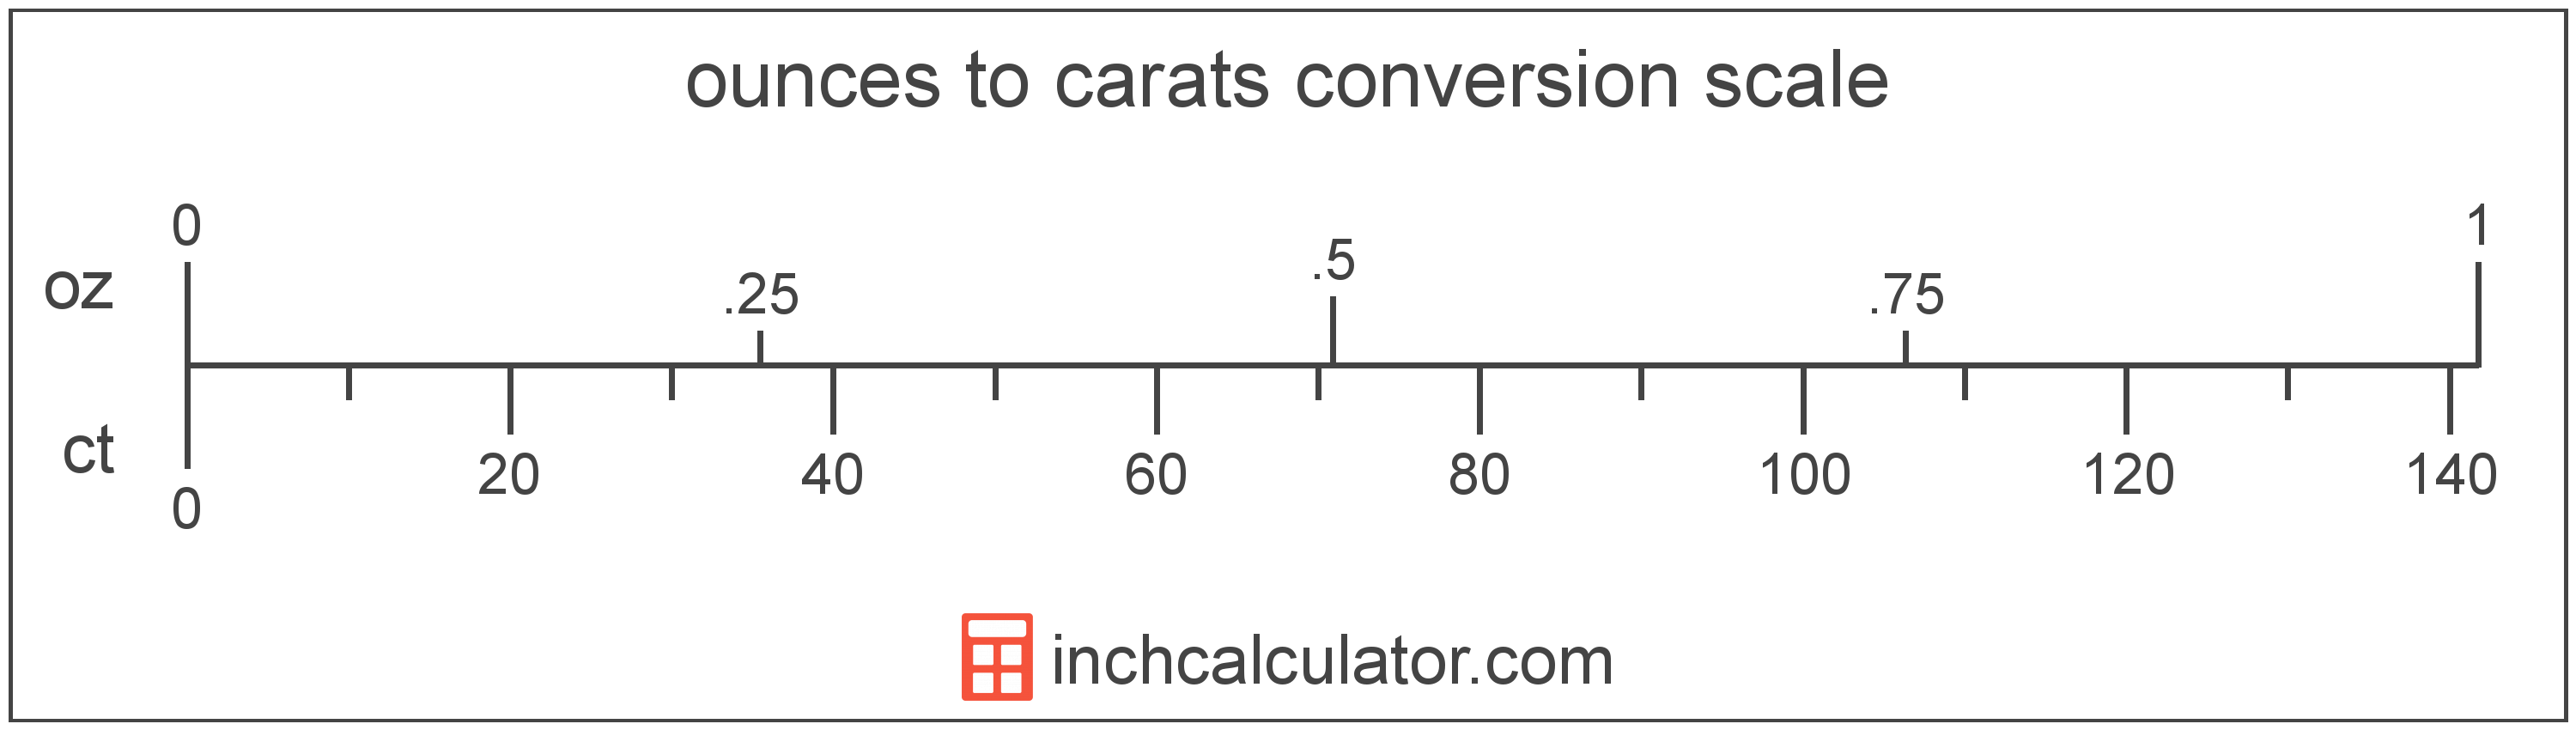 conversion scale showing carats and equivalent ounces weight values